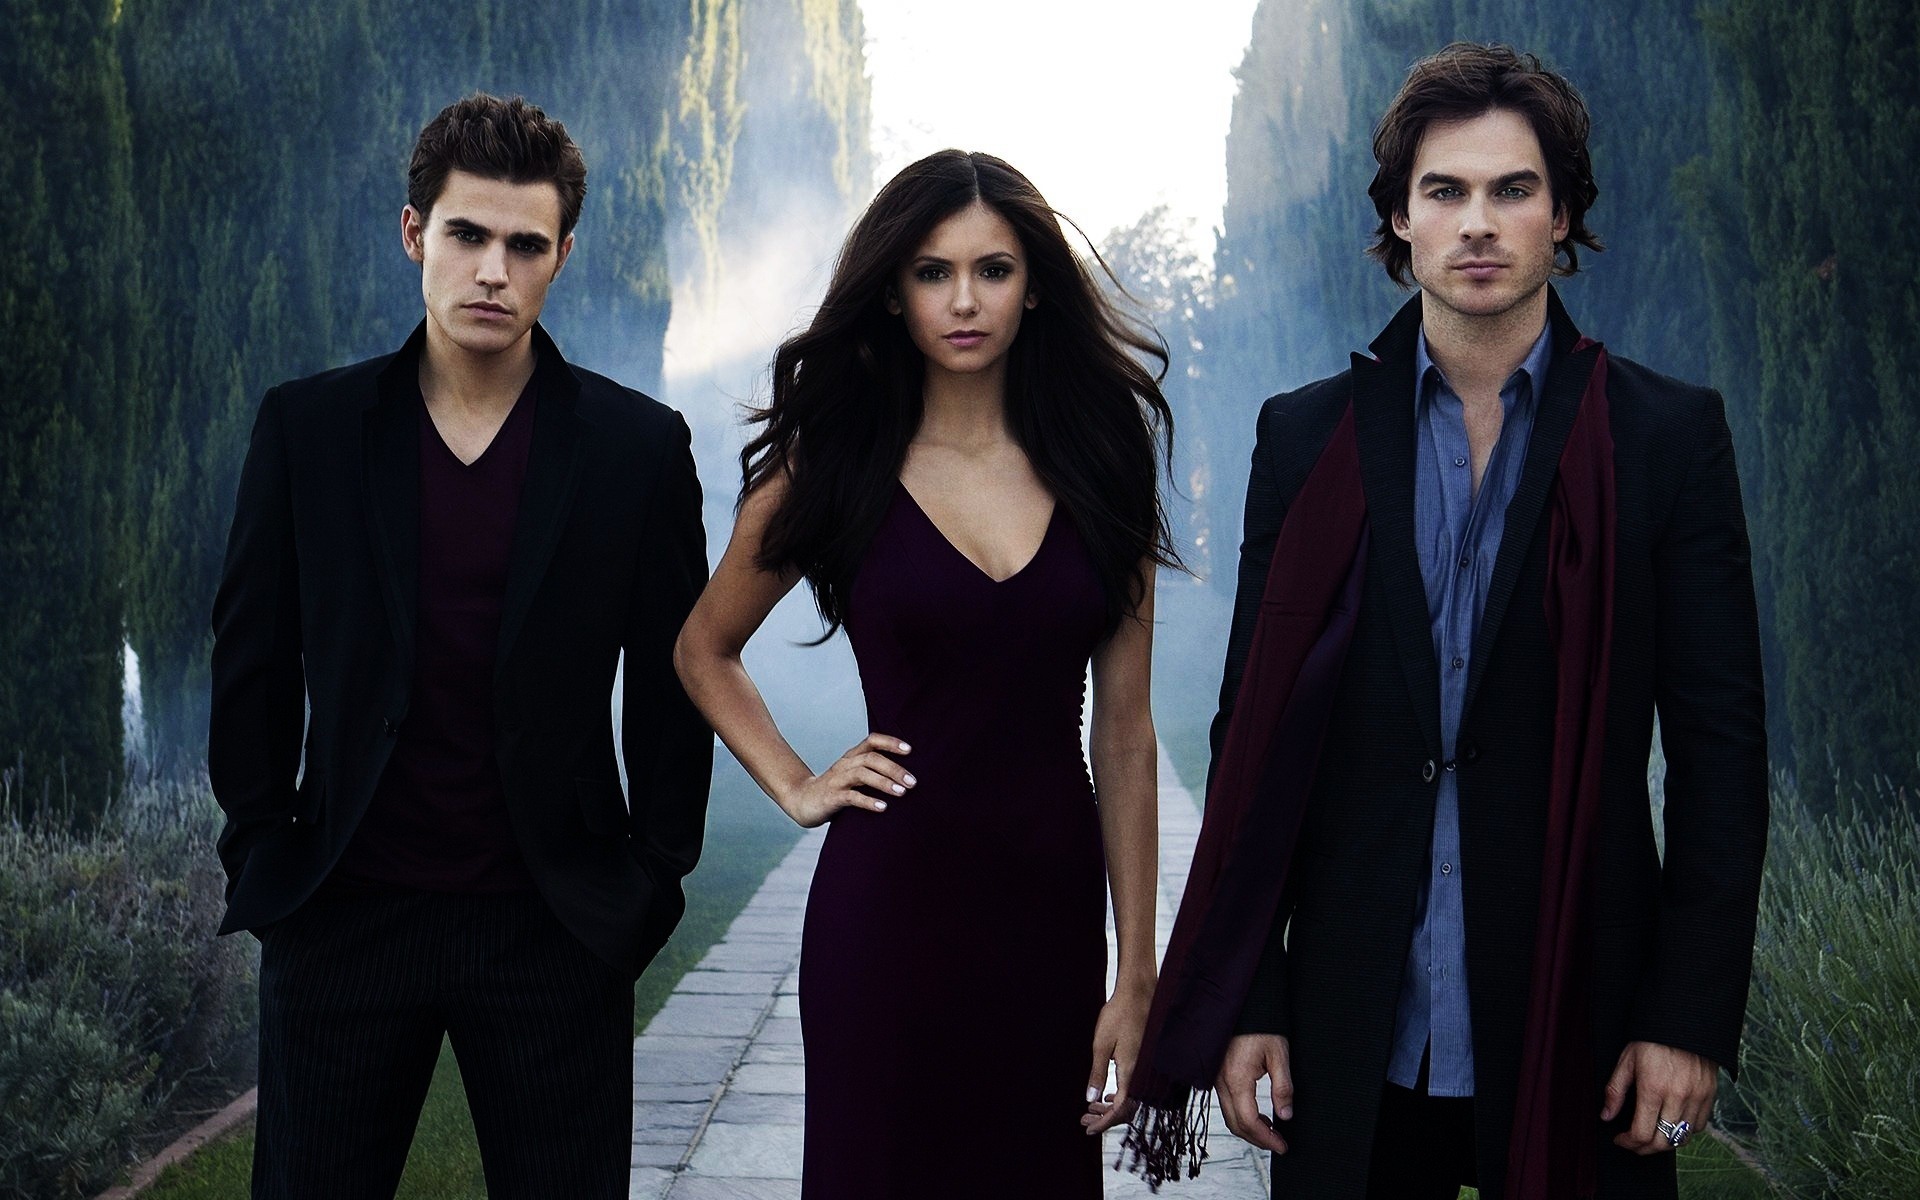 The Vampire Diaries HD Wallpapers #6 - 1920x1200